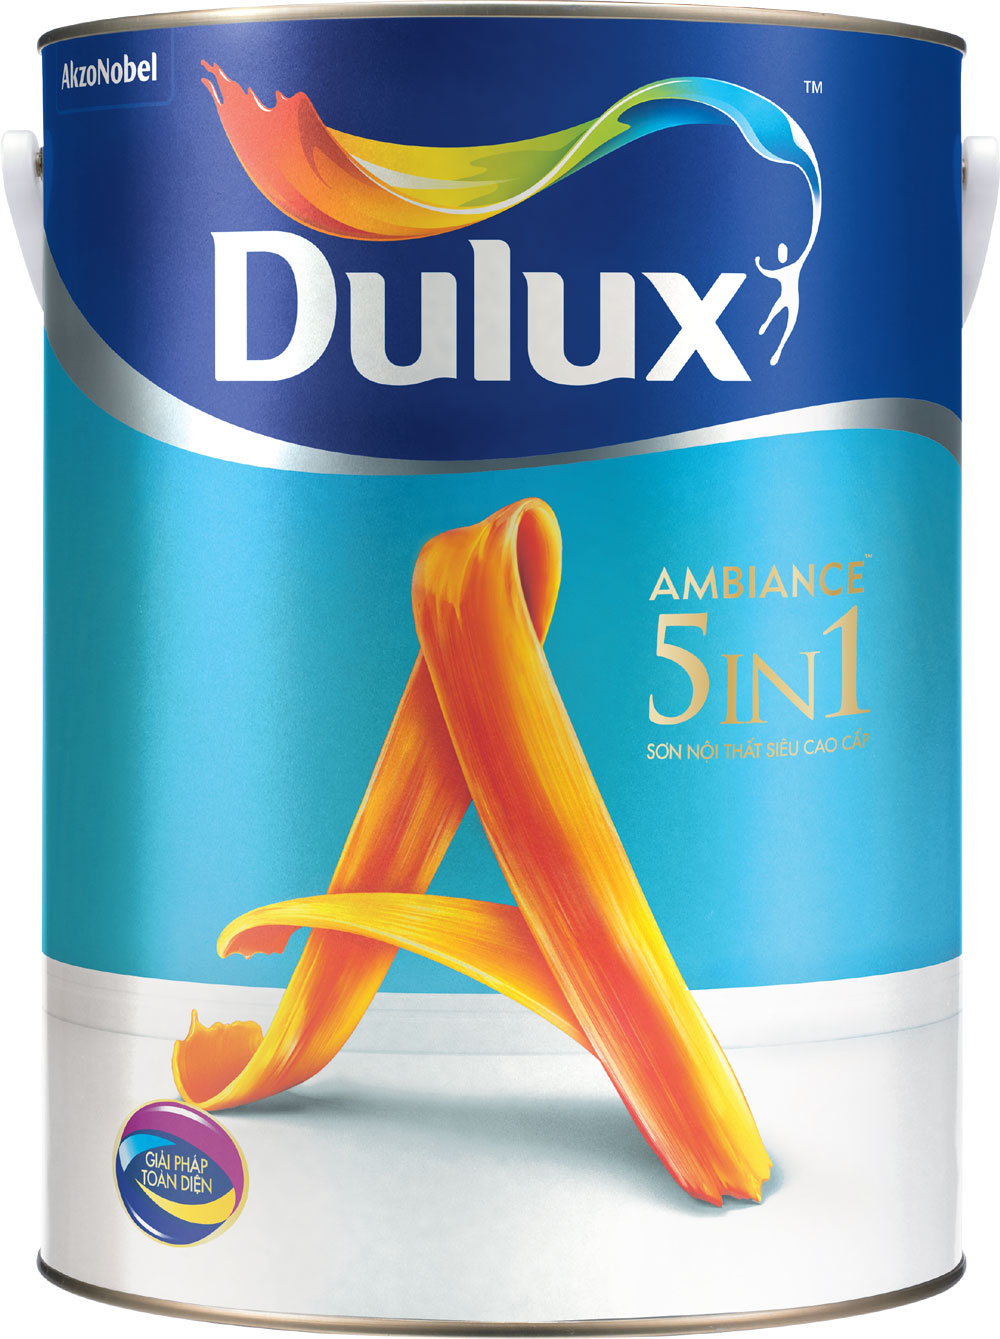 Sơn Dulux Ambiance 5 in 1 nội thất cao cấp 66A